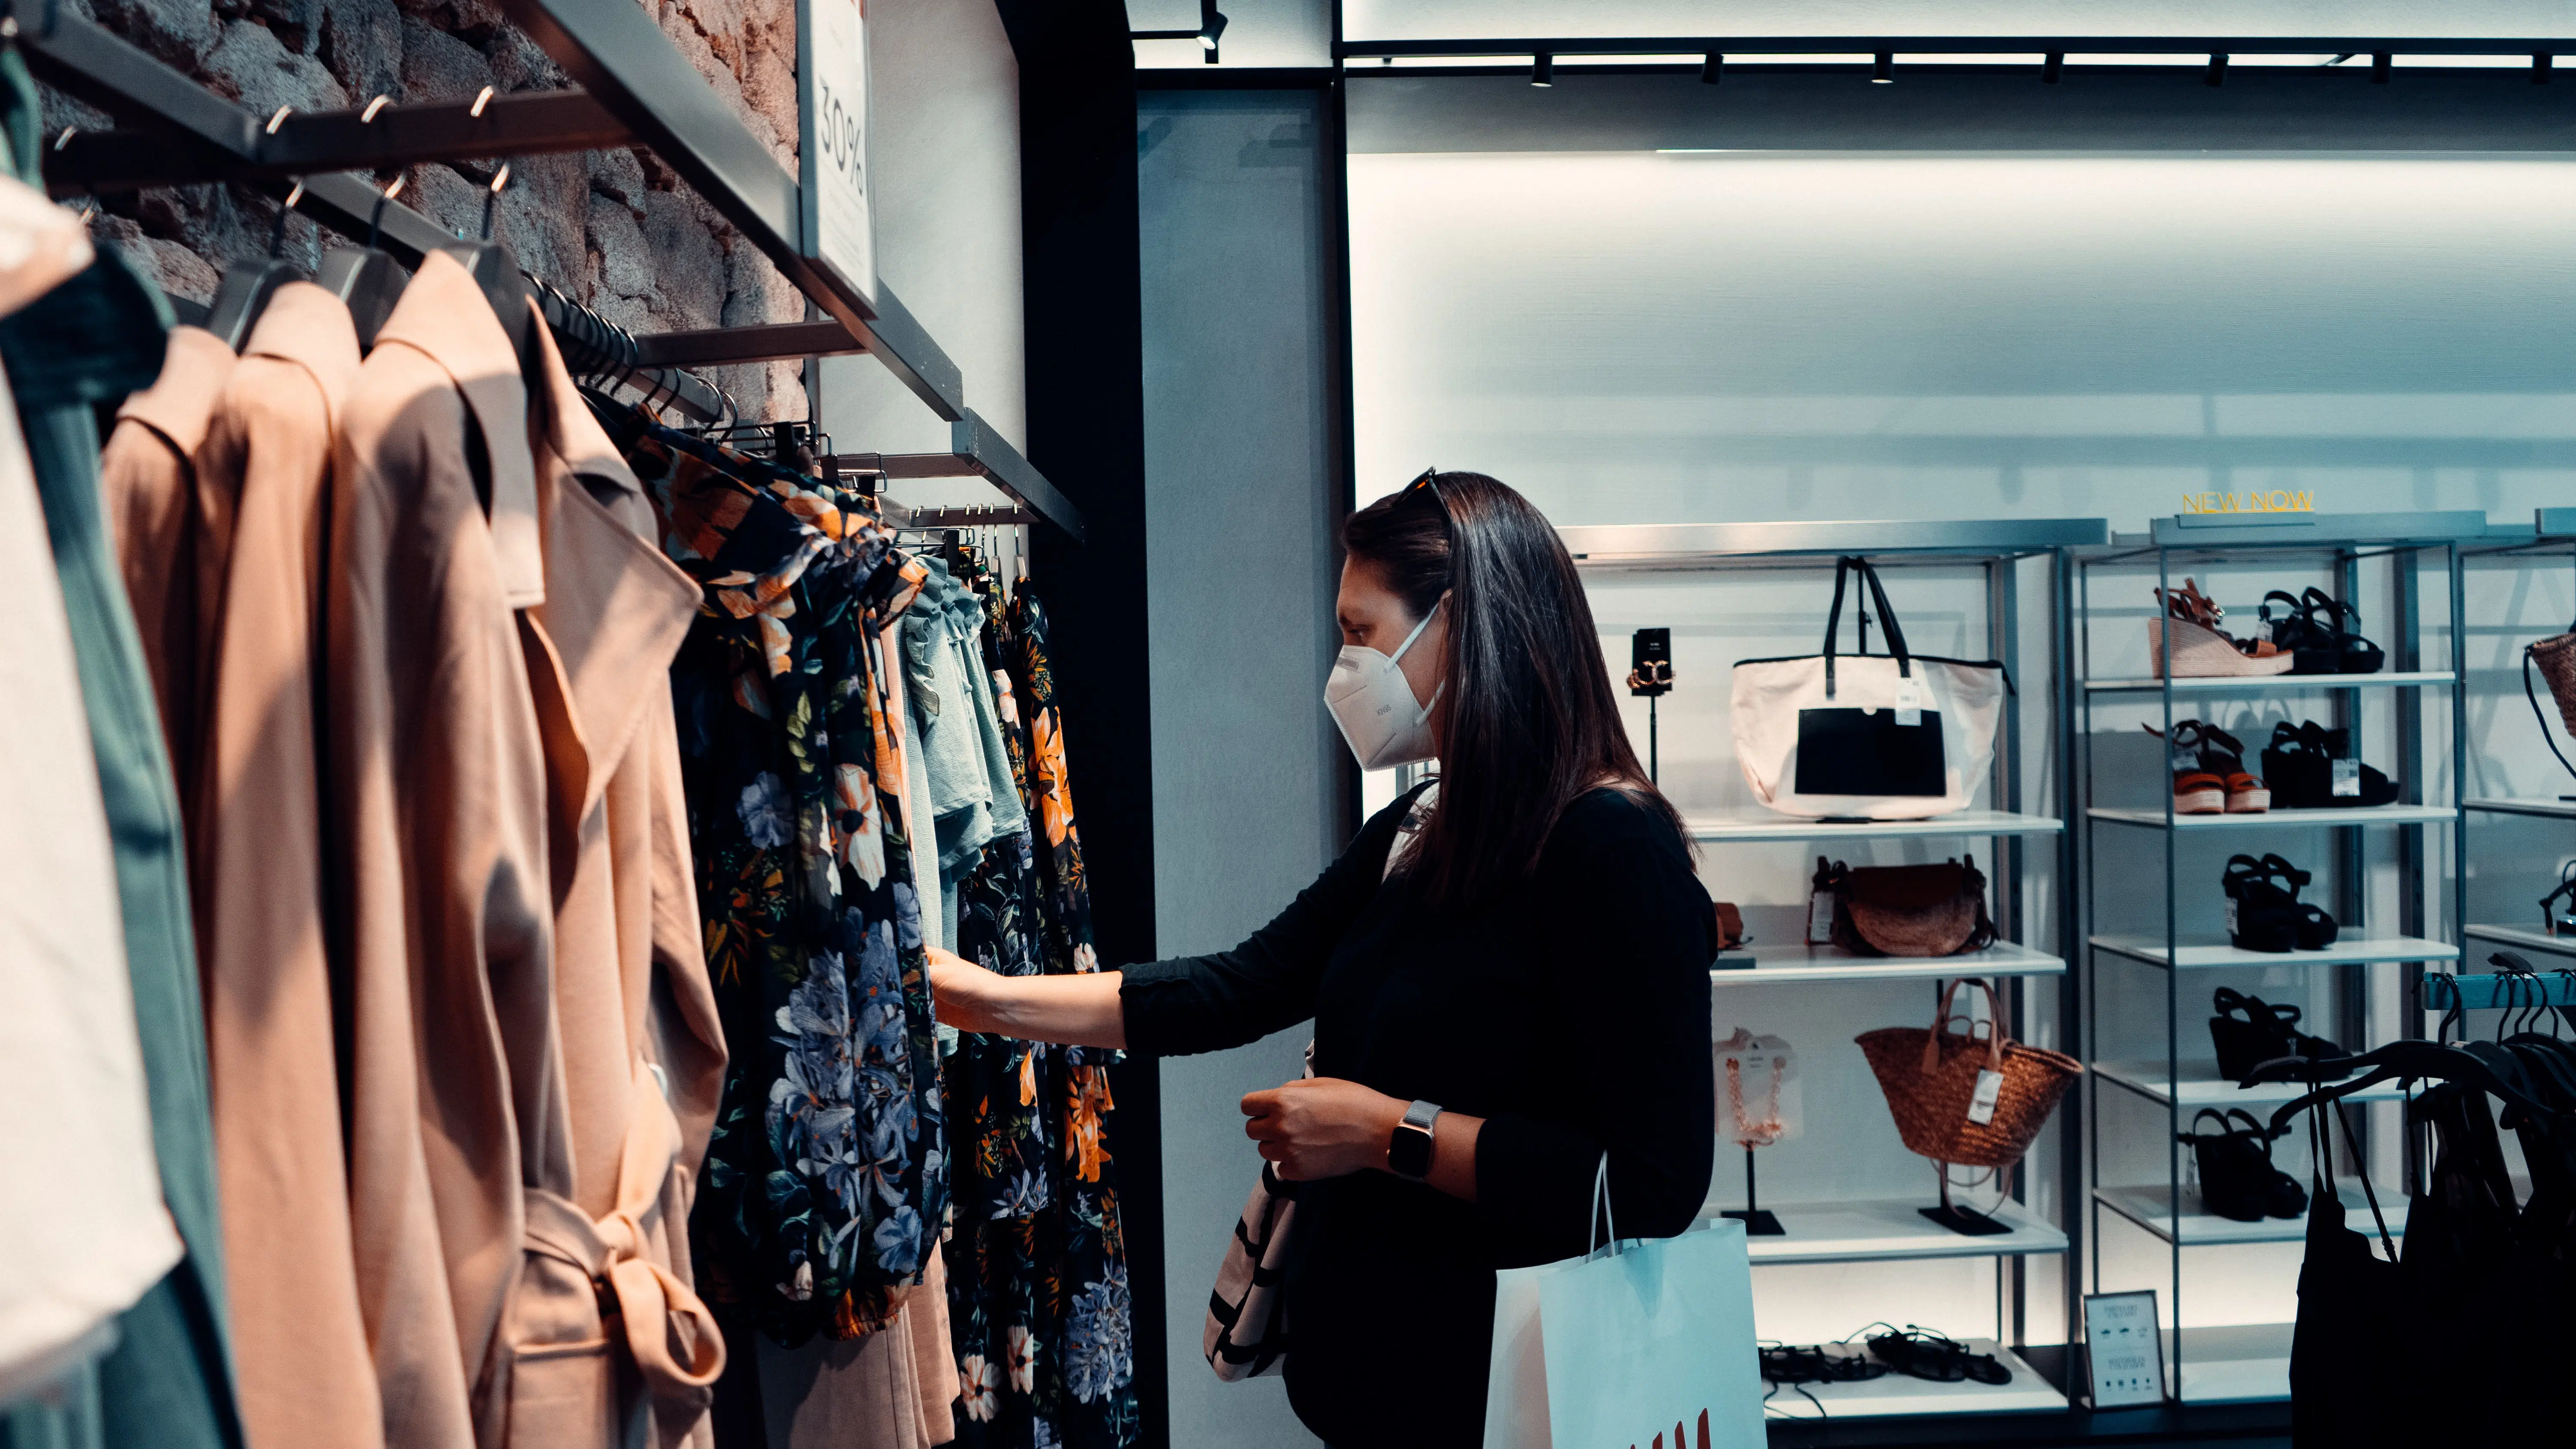 Interior of a store. White woman with black hair and a white face mask looks through a clothing rack.